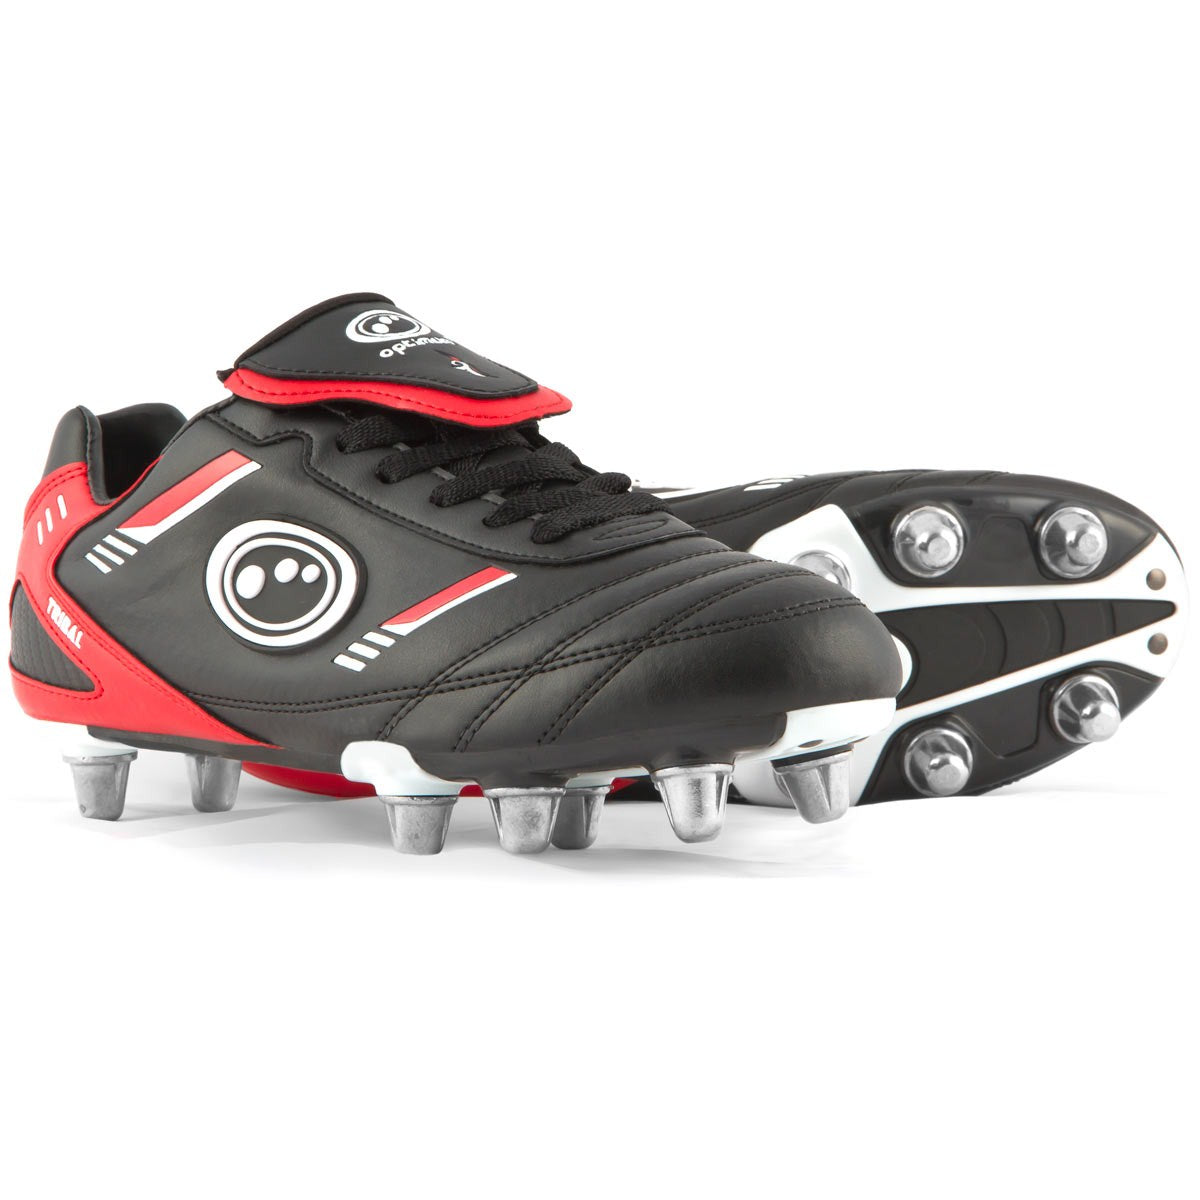 Optimum junior rugby boot tribal white blue or black red